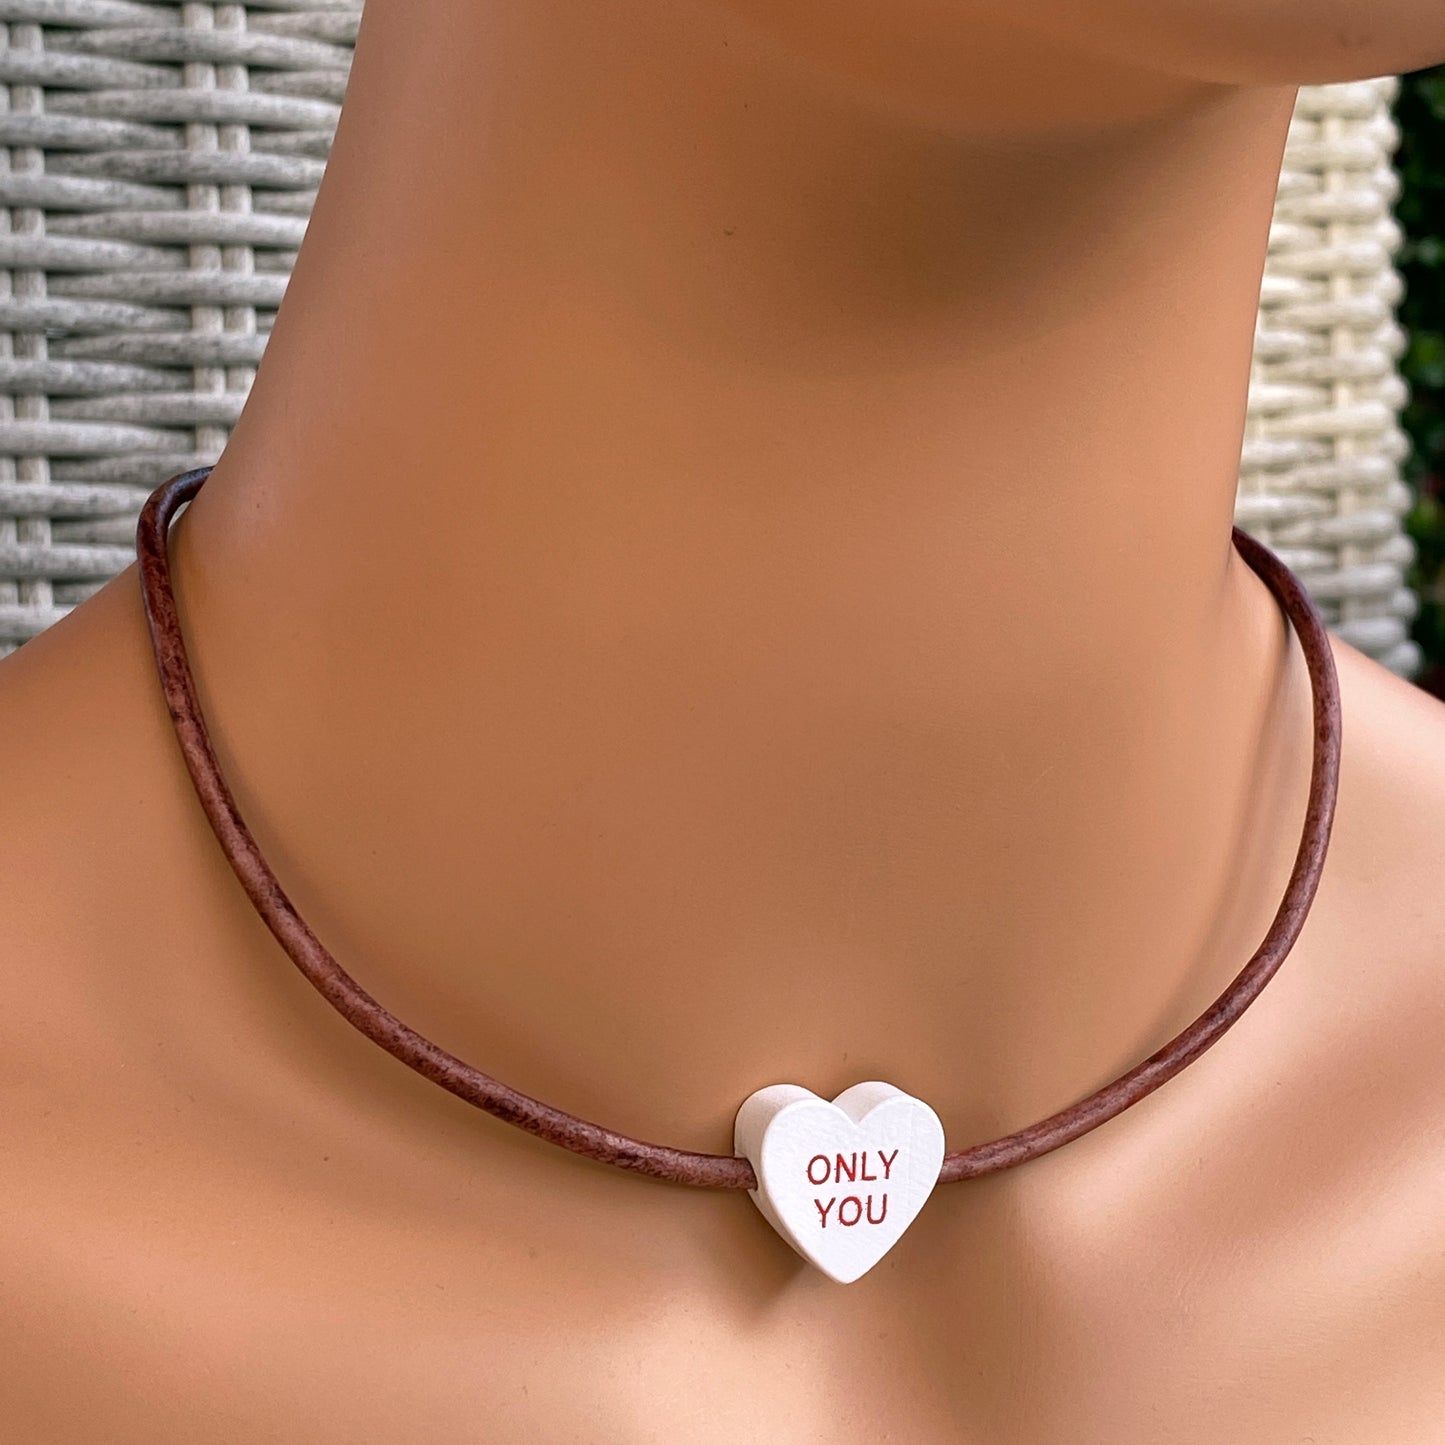 Candy Heart Valentine's Phrase Leather Necklace